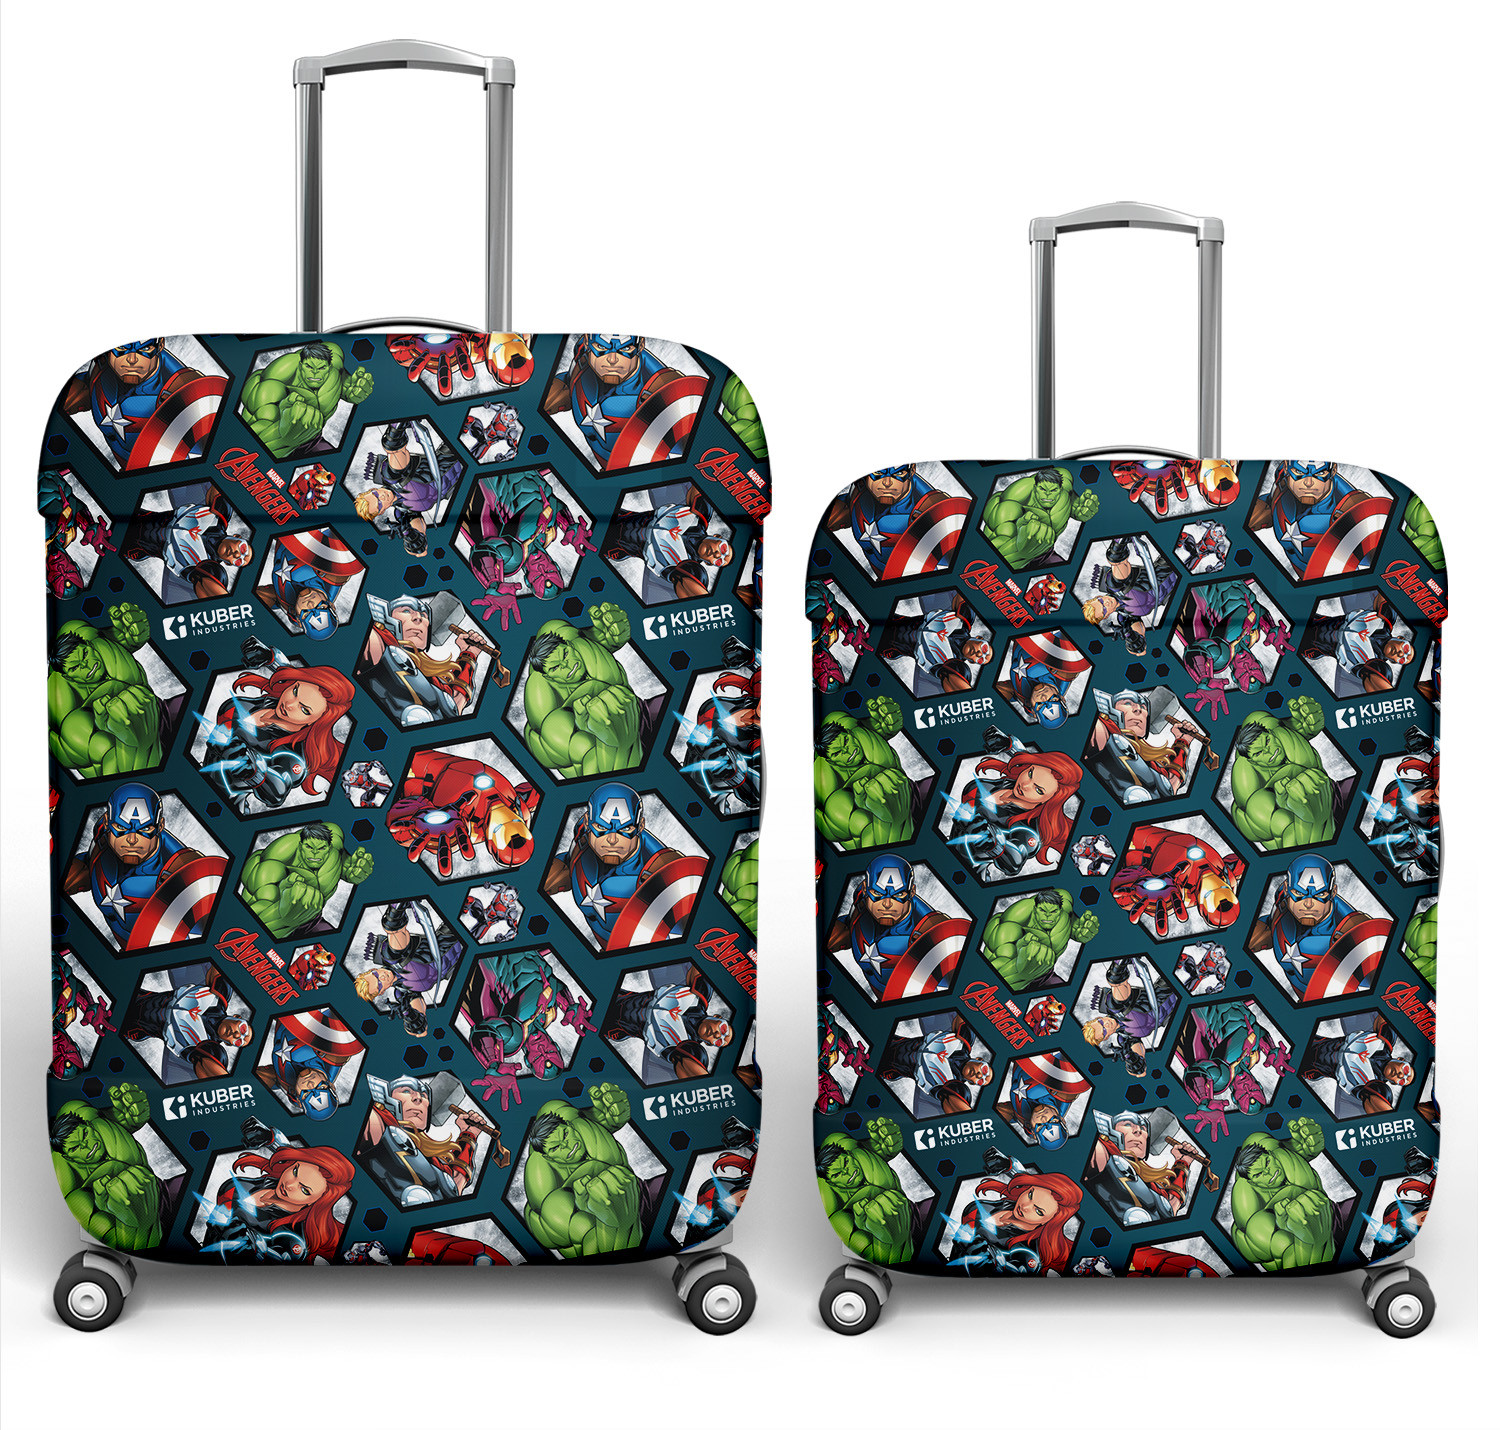 Kuber Industries Marvel Avengers Luggage Cover | Polyester Travel Suitcase Cover | Washable | Stretchable Suitcase Cover | 18-22 Inch-Small | 22-26 Inch-Medium | Pack of 2 | Blue